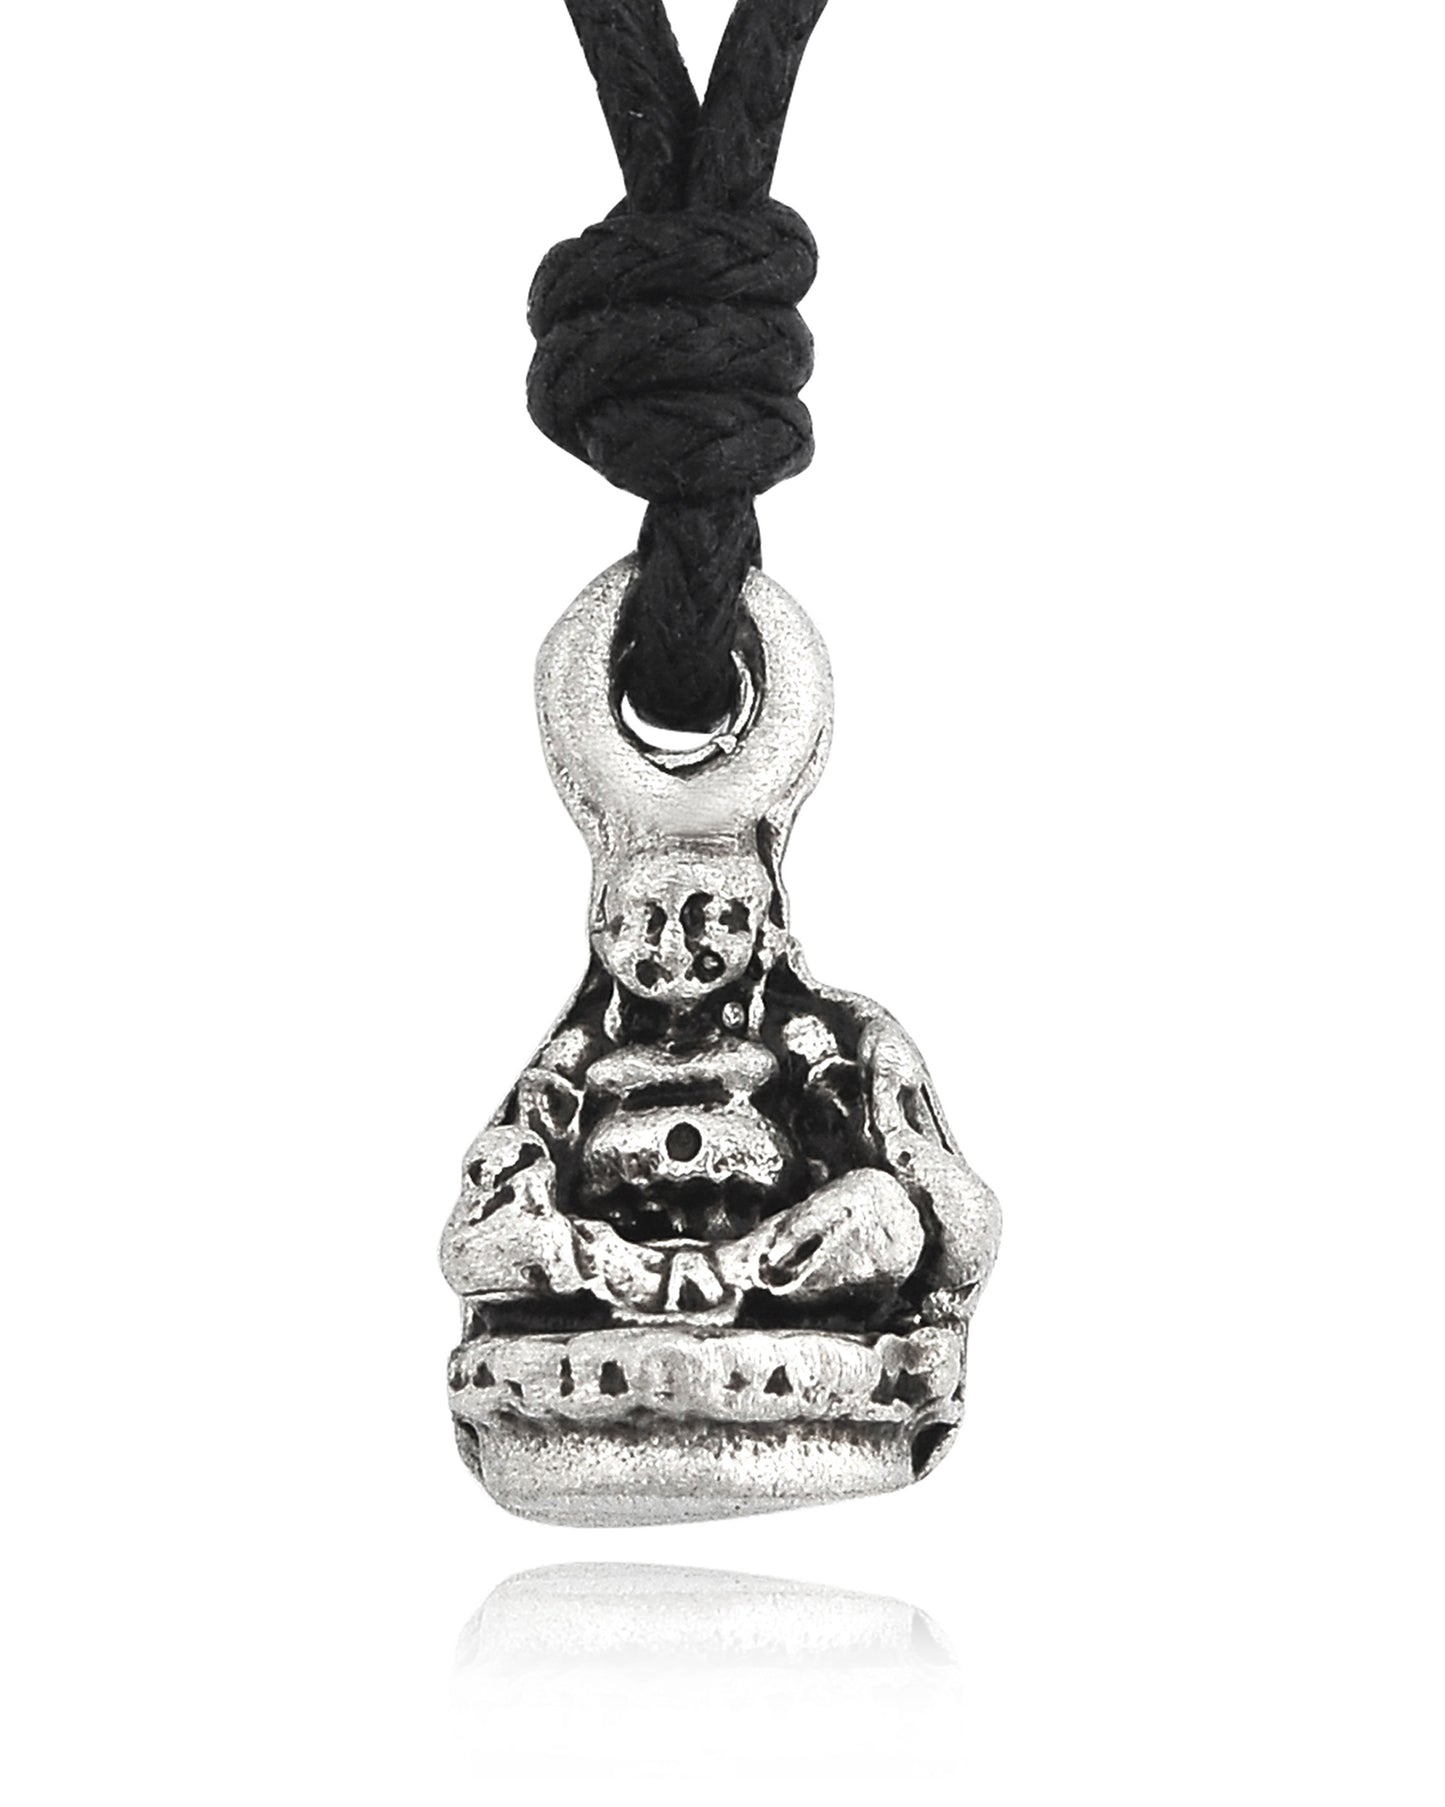 New Fat Zen Buddha Silver Pewter Charm Necklace Pendant Jewelry With Cotton Cord